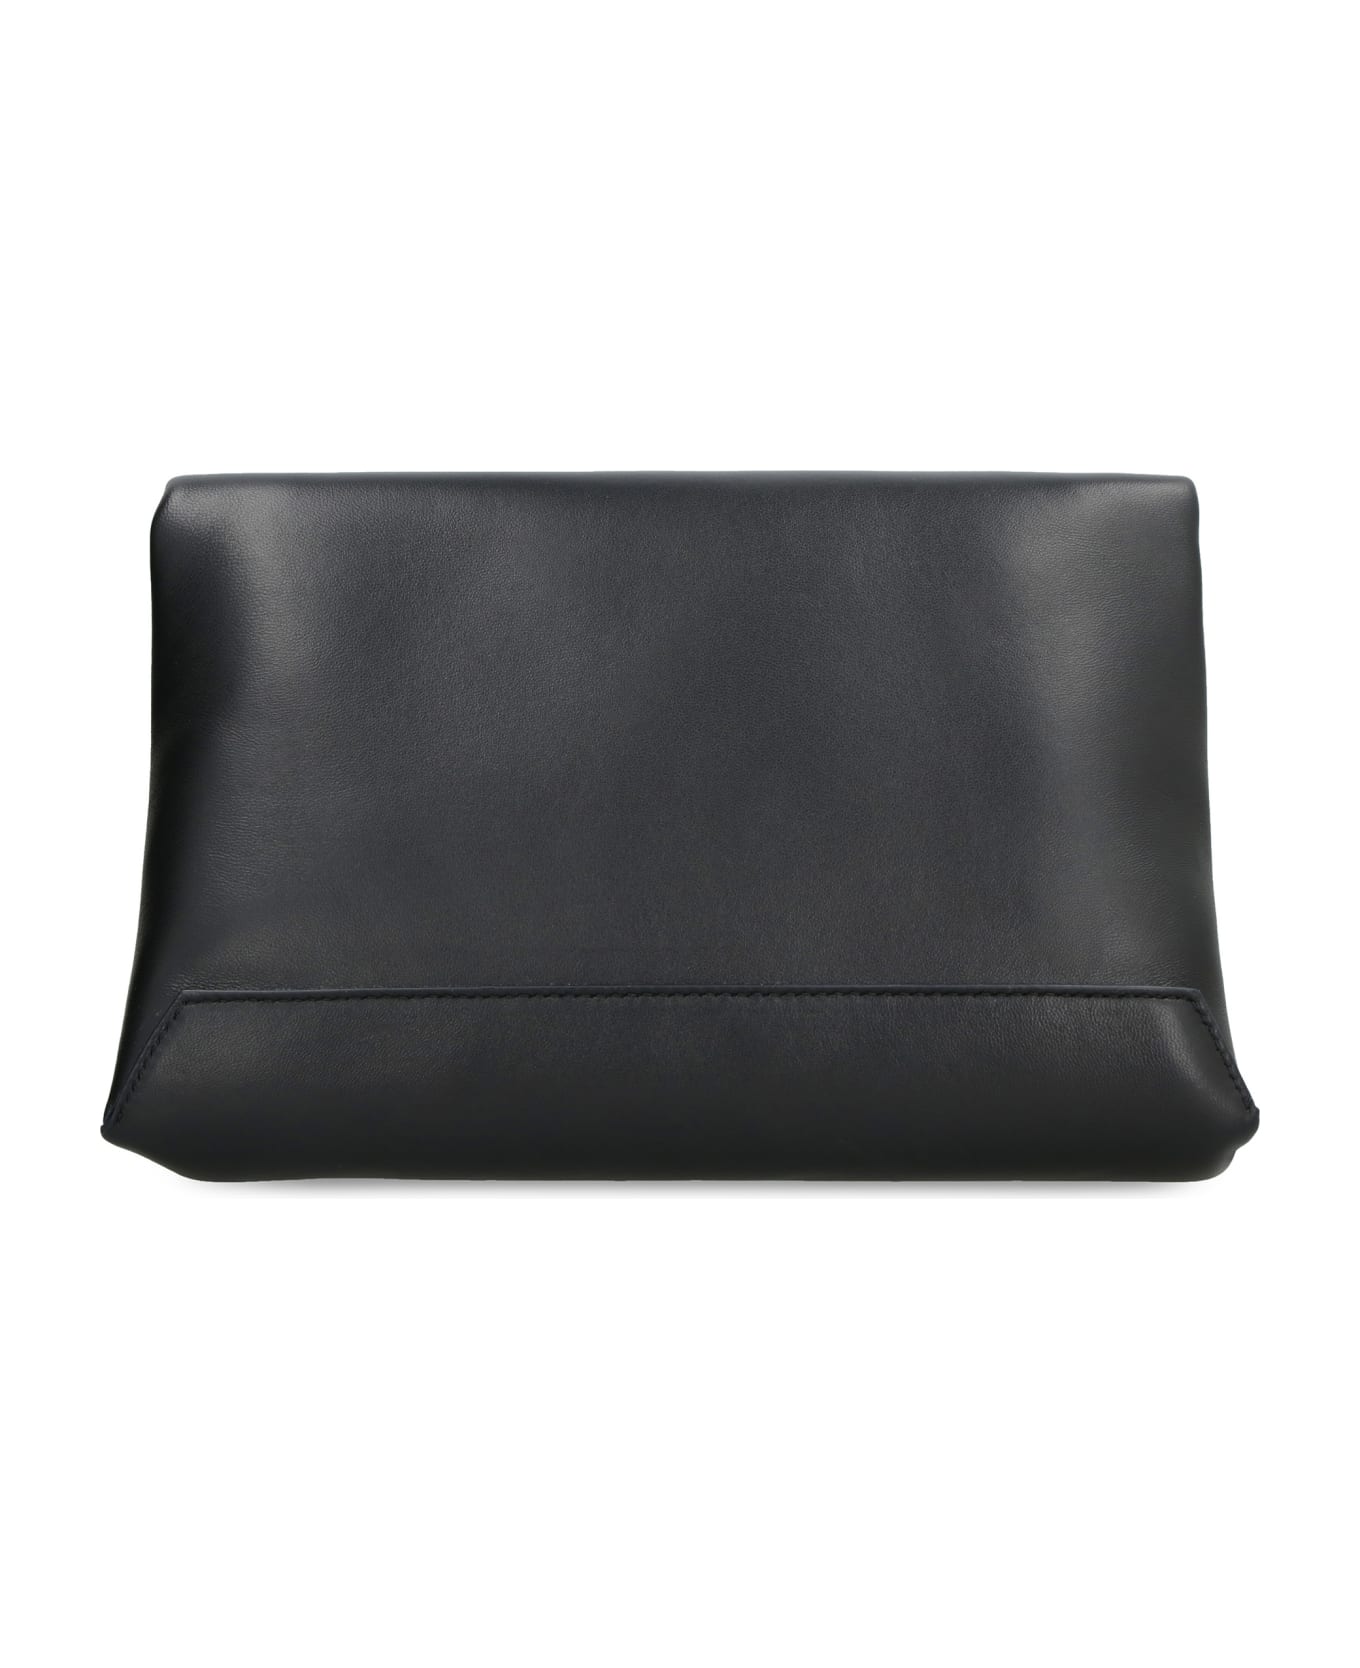 Victoria Beckham Leather Pouch - black クラッチバッグ